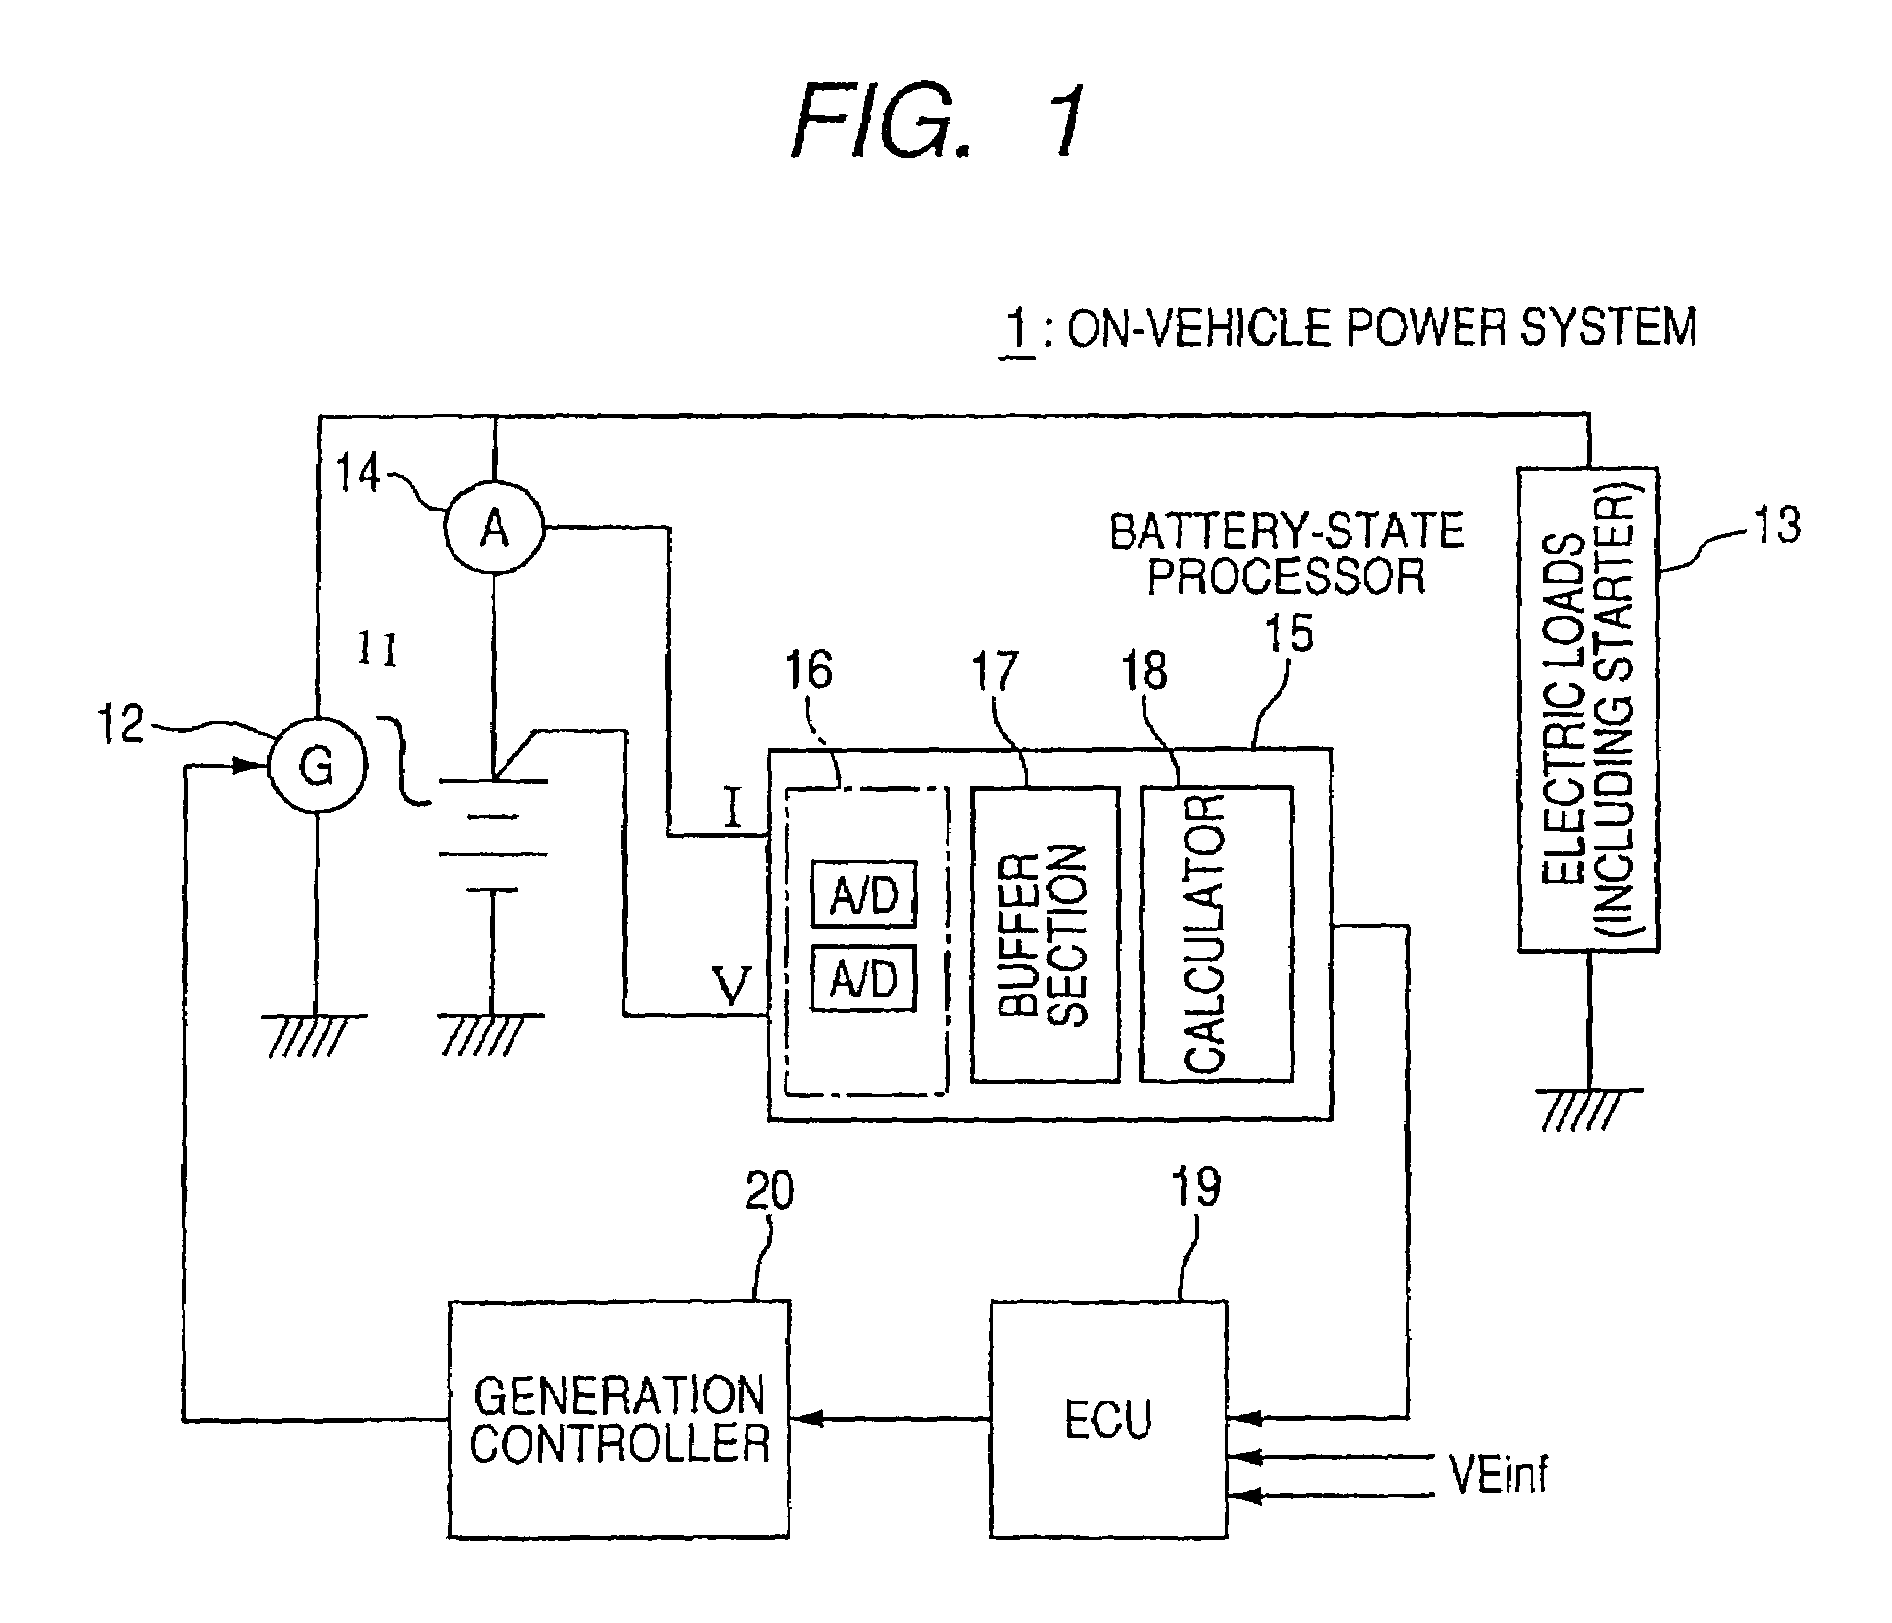 Apparatus for calculating quantity indicating charged state of on-vehicle battery